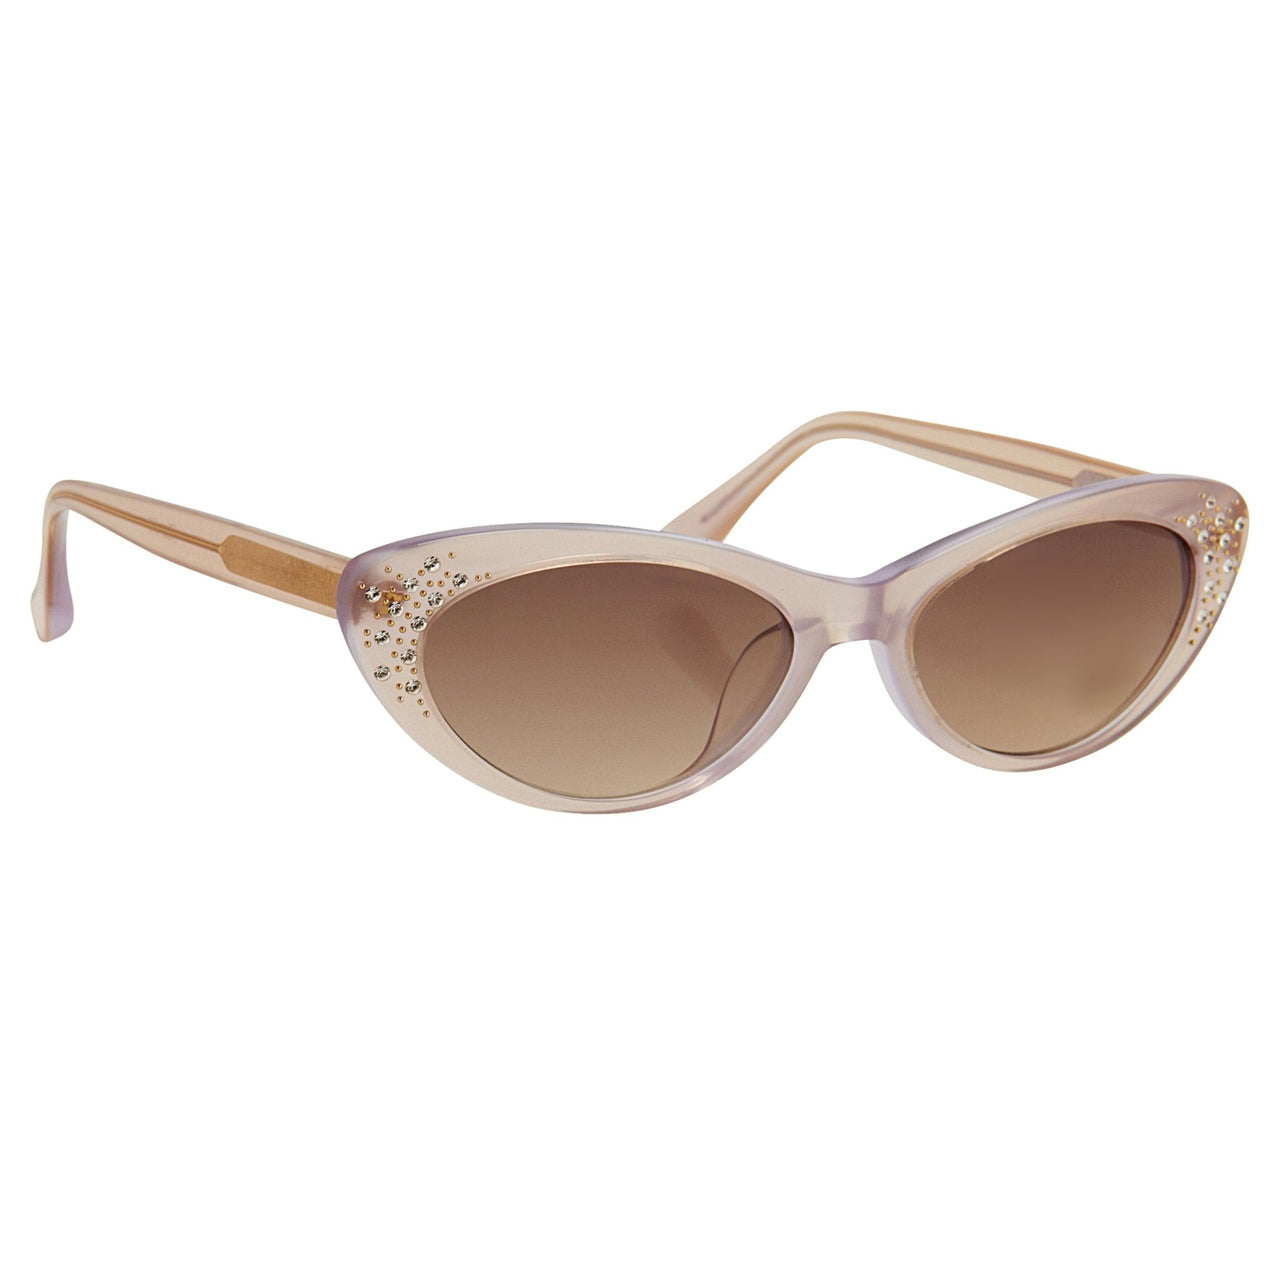 Agent Provocateur Sunglasses Cat Eye Beige and Brown - Watches & Crystals